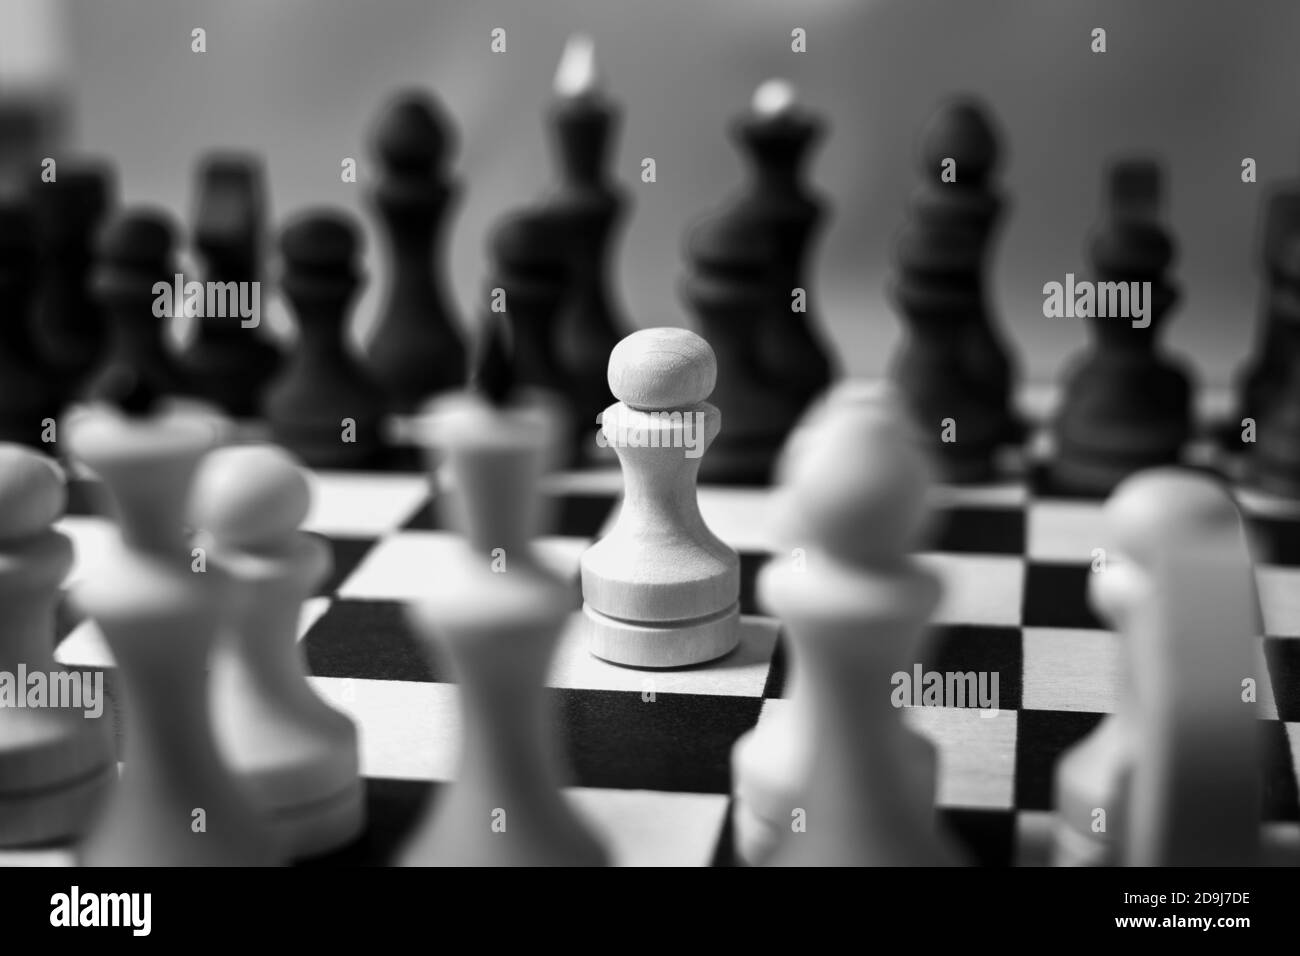 The first move in chess was made by a white pawn. Chess start, close-up, selective focus, black and white. Business concept start of business negotiations, business cooperation Stock Photo